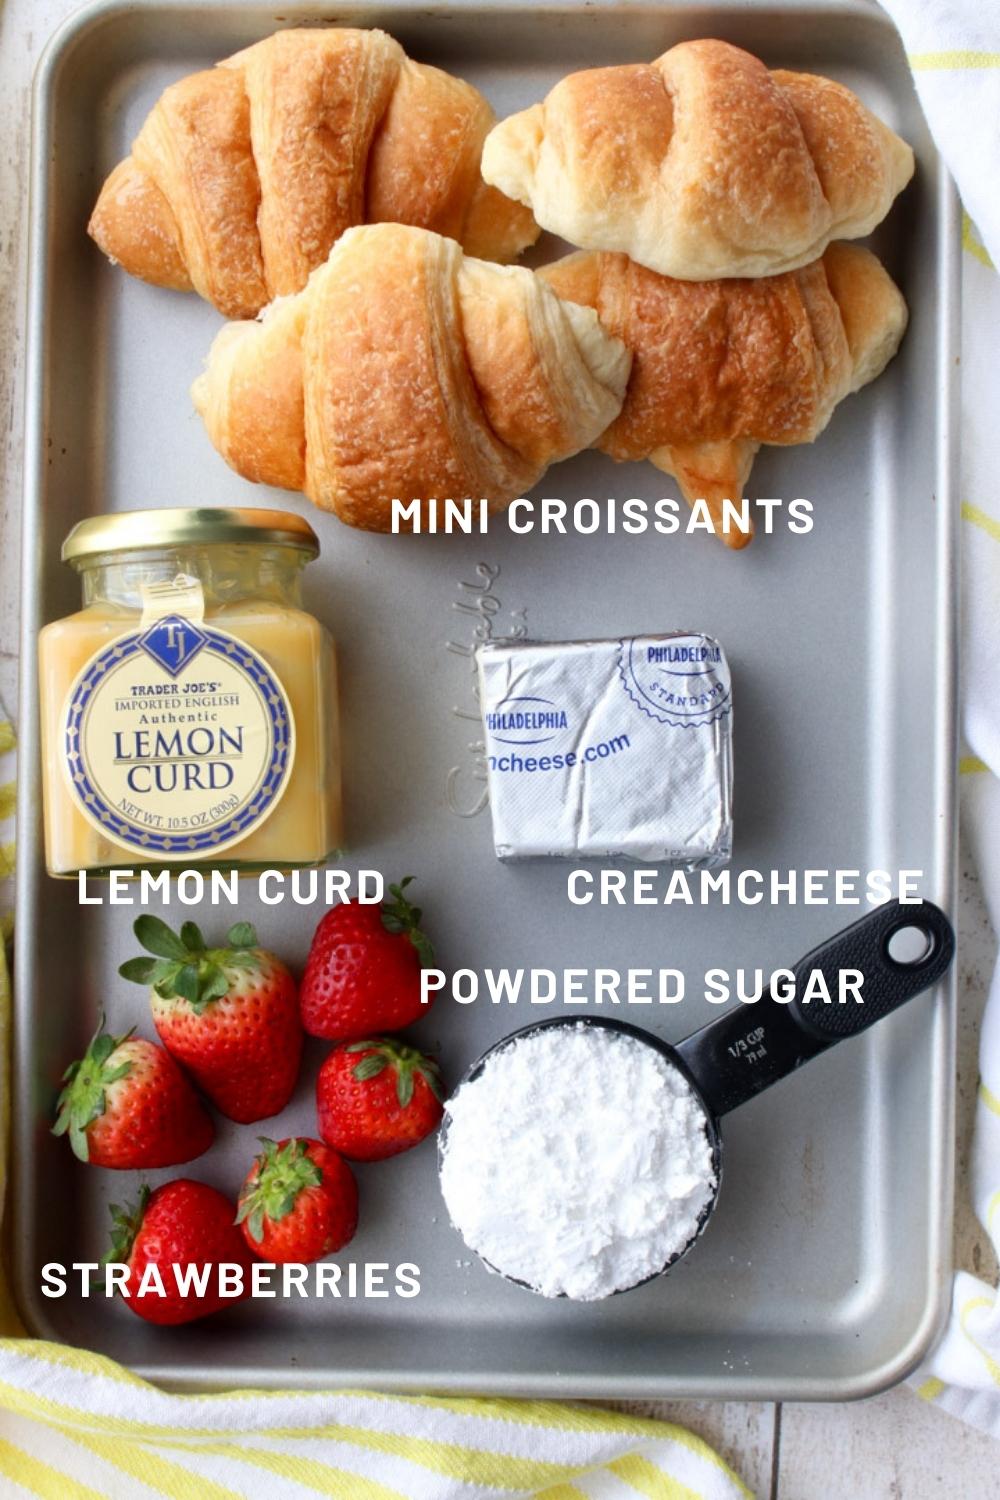 Tray of ingredients to make strawberry lemon croissants